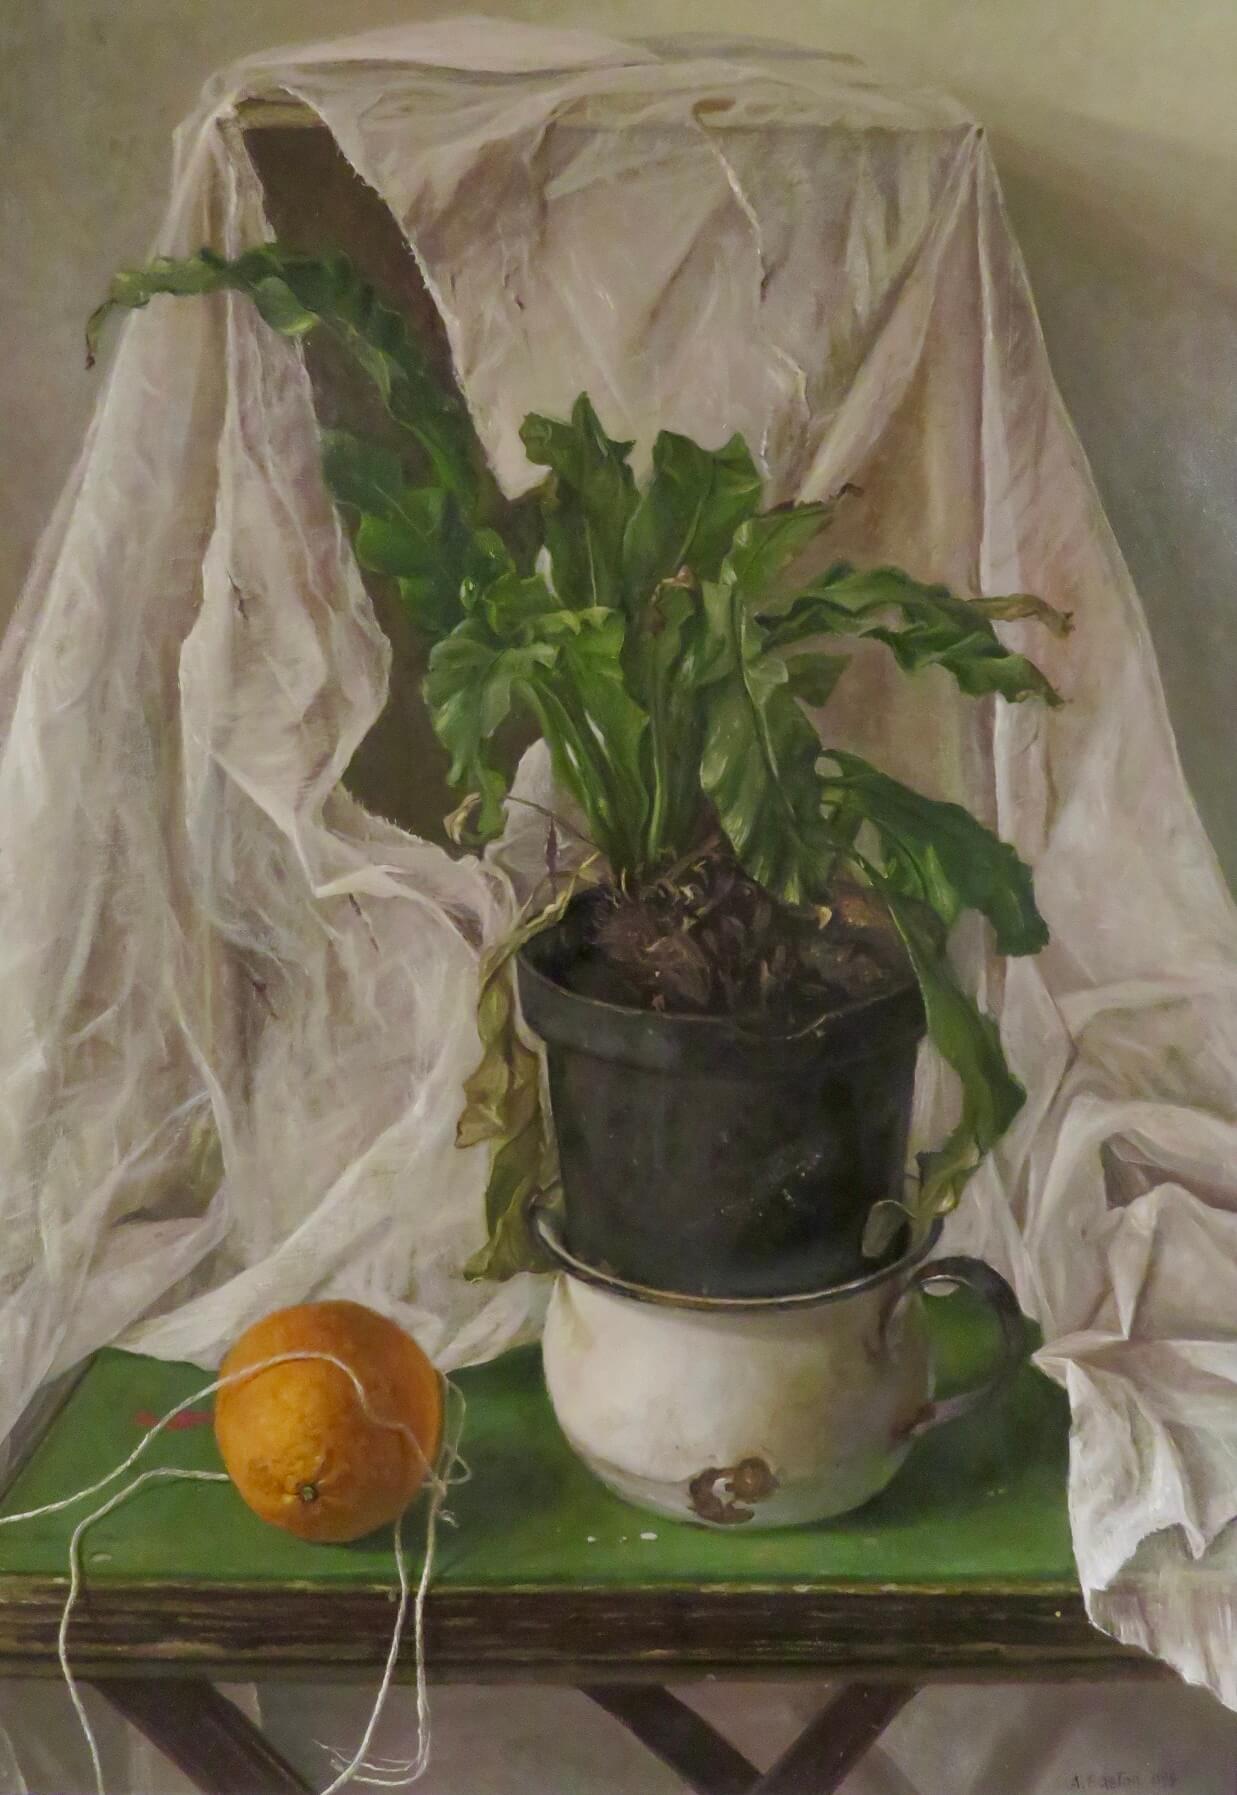 ARTIST: Arthur Easton ROI (1939-) British
TITLE: “Still Life With Fern And Orange”
SIGNED: lower right
MEDIUM: oil on board
SIZE: 98cm x 74cm inc. frame
CONDITION: excellent
DETAIL: A member of the Royal Institute of Oil Painters since 1979, Arthur